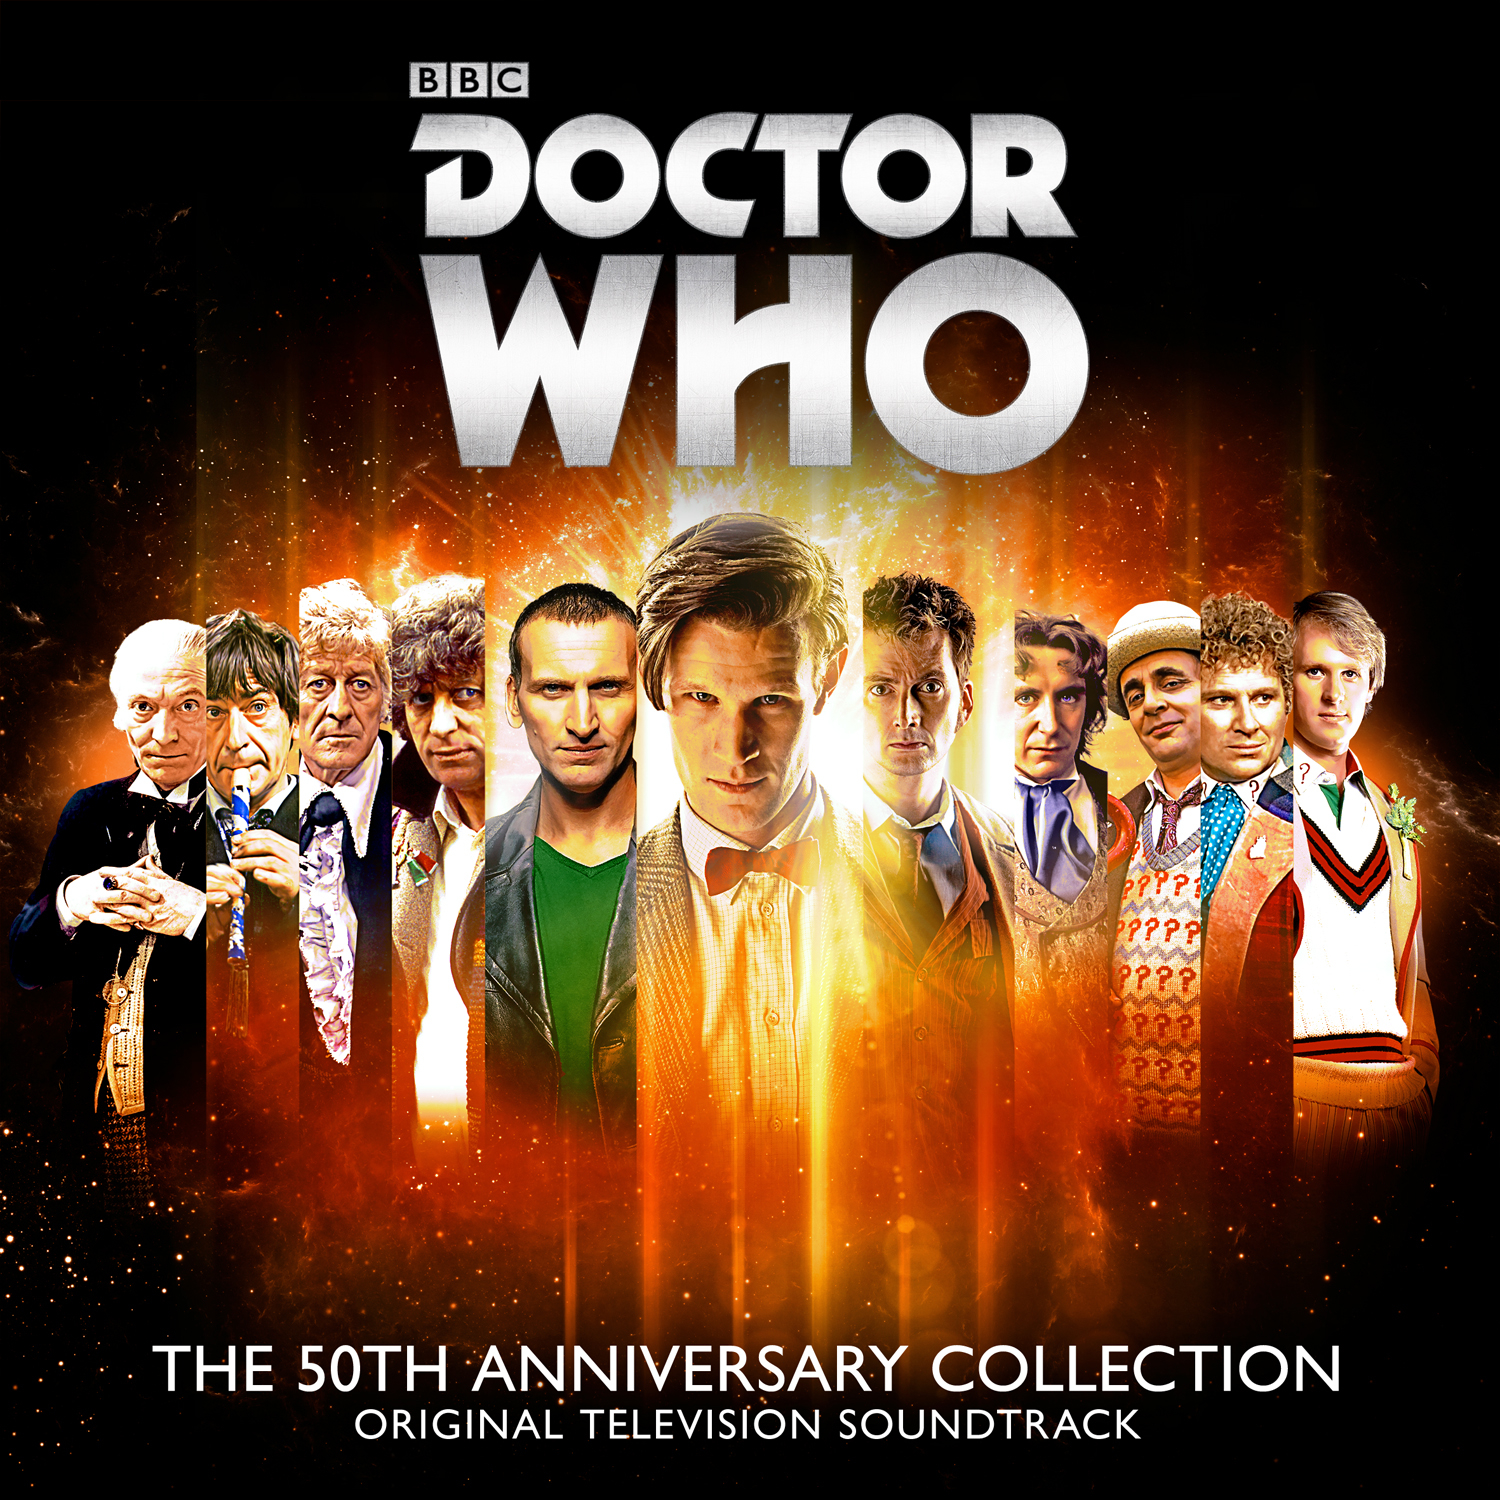 The Long Song (From "Doctor Who: Series 7")